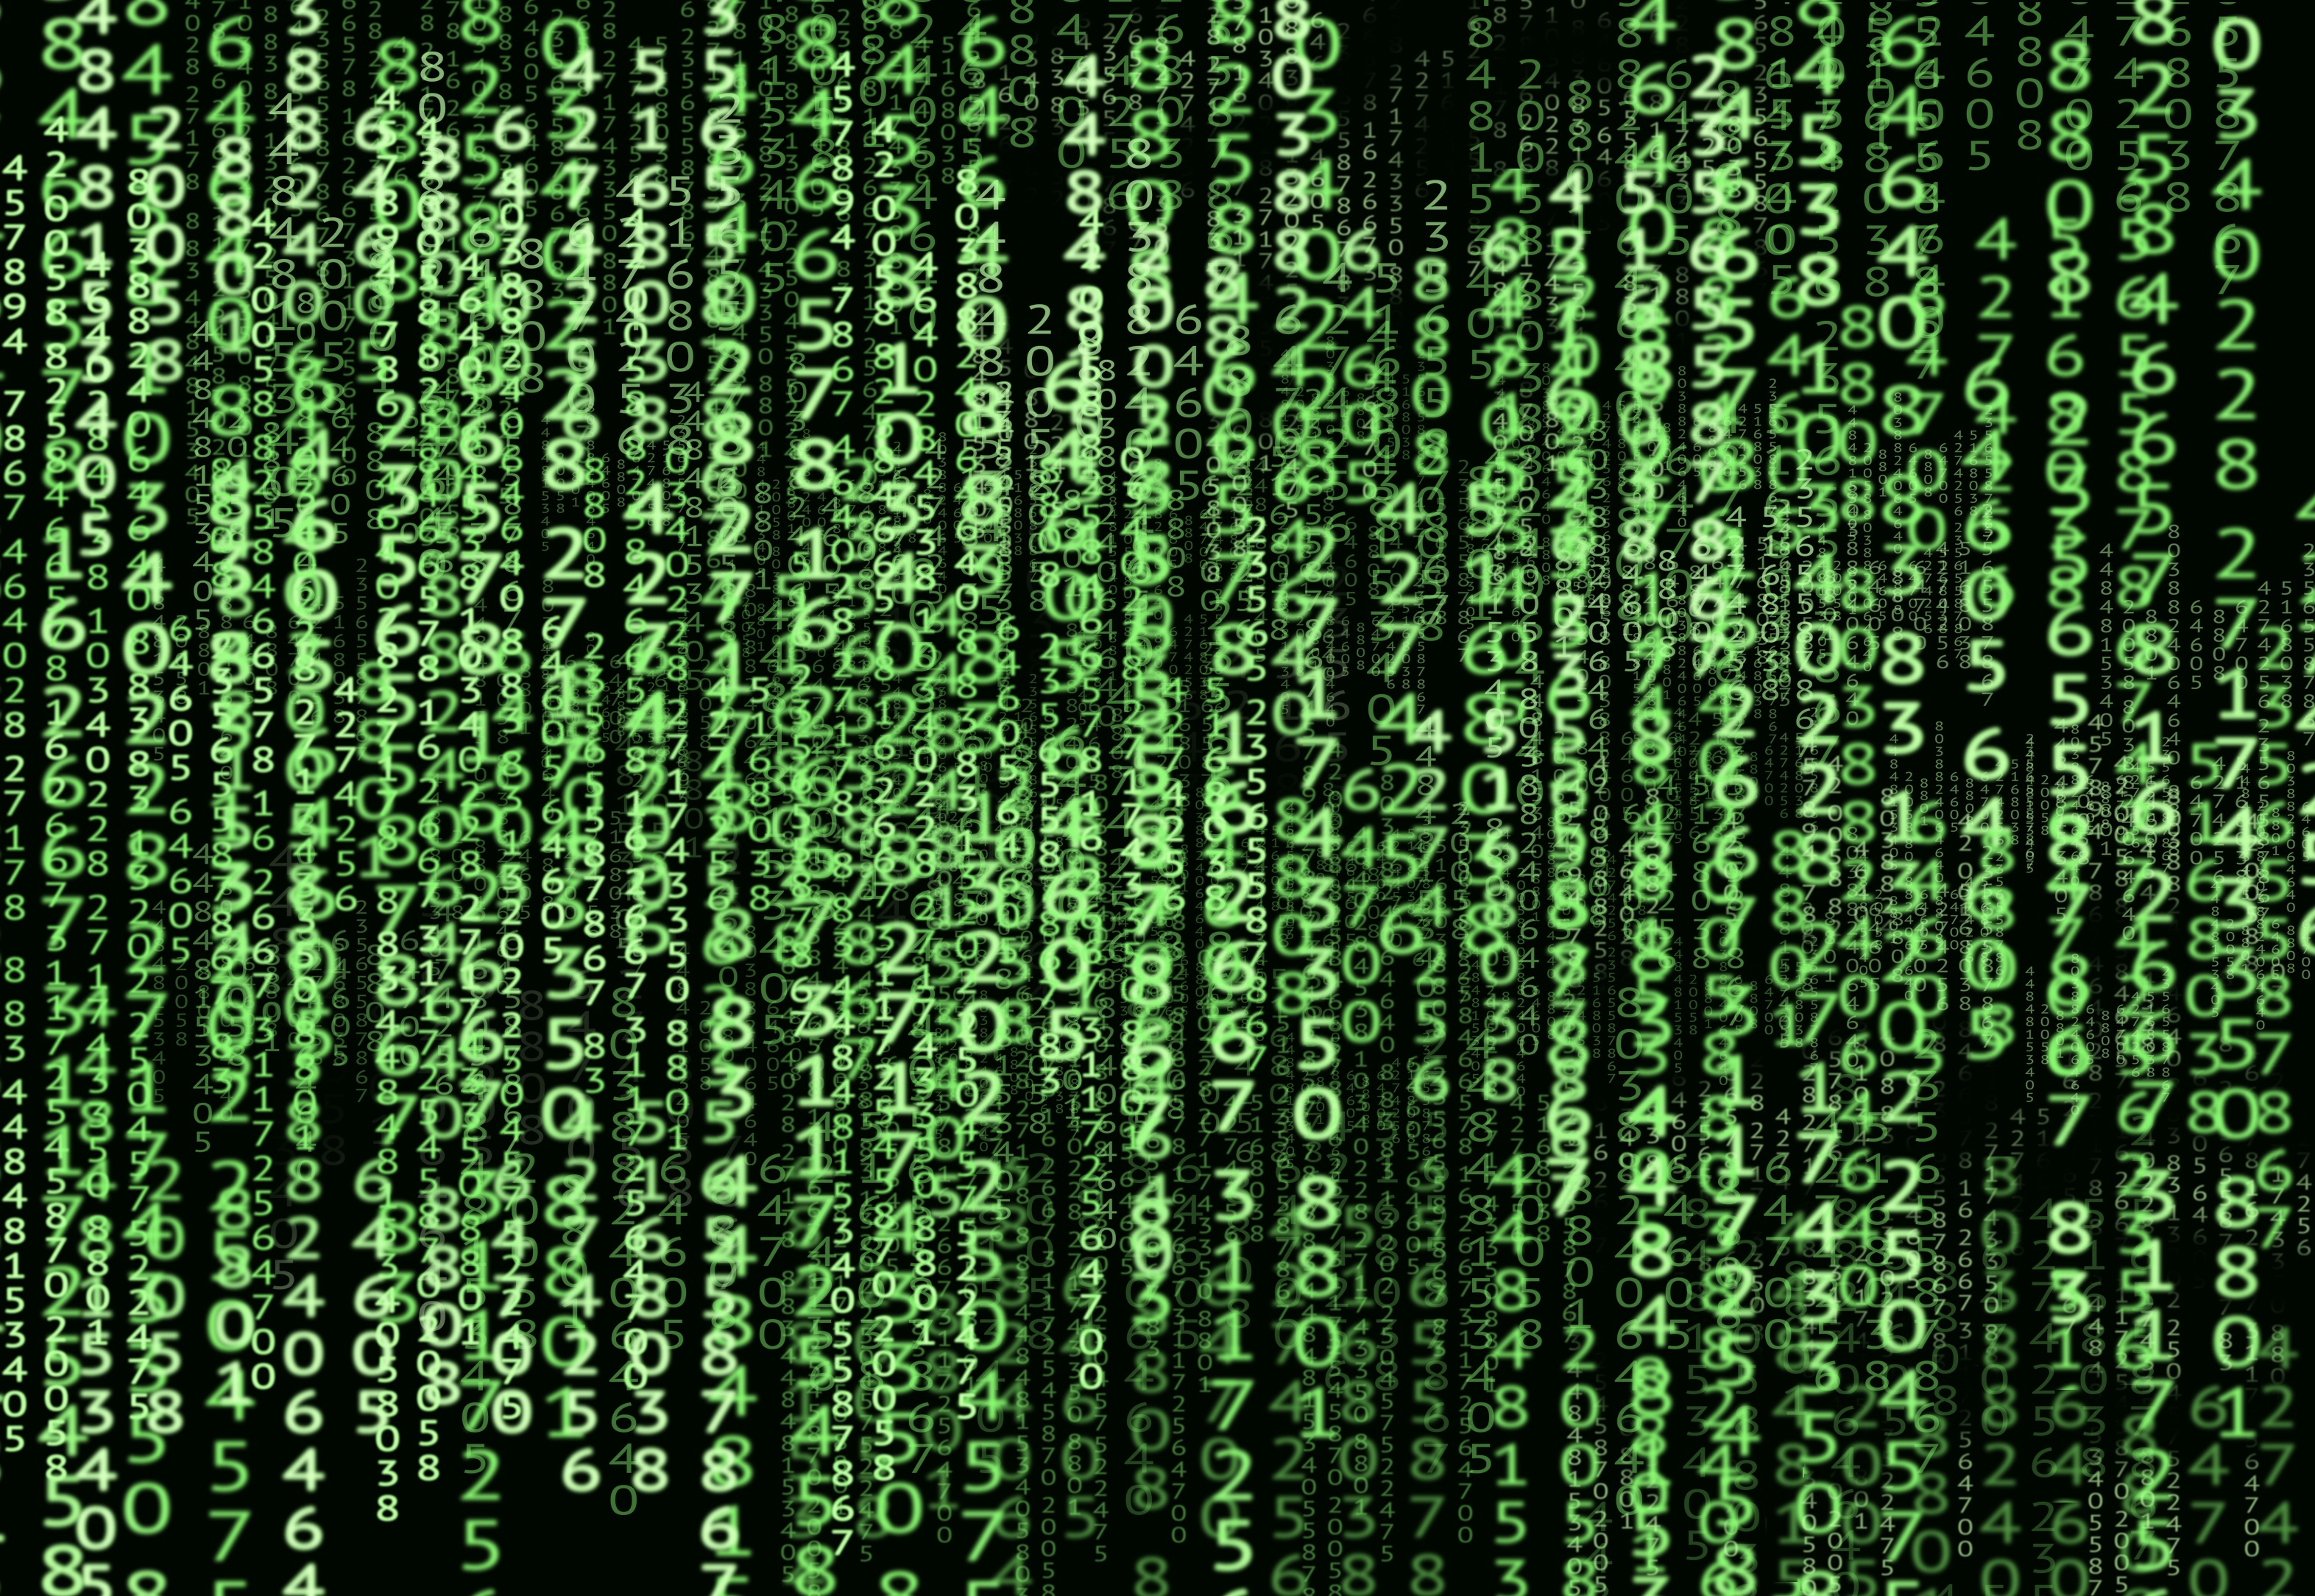 technology, technologies, matrix, code, miscellanea, miscellaneous, numbers, system